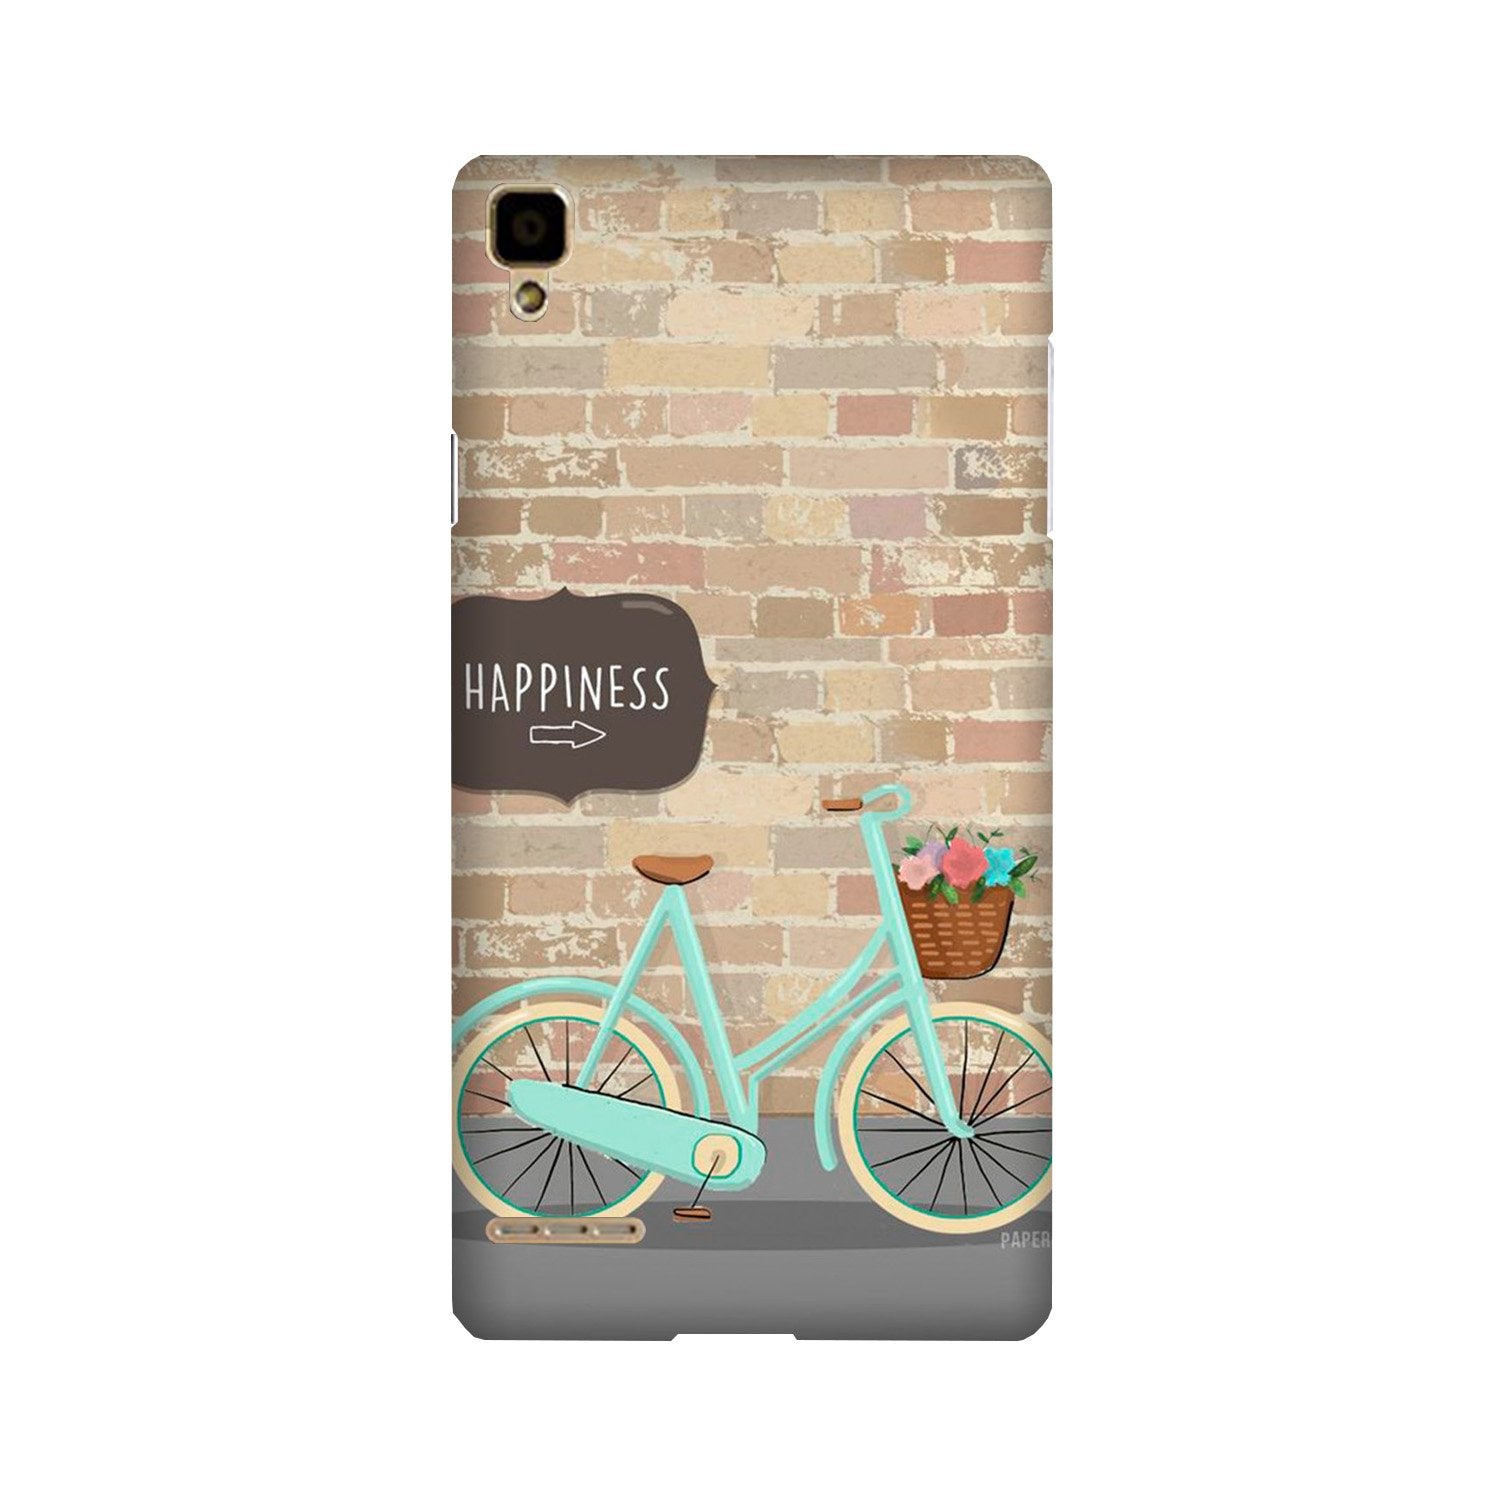 Happiness Case for Oppo F1